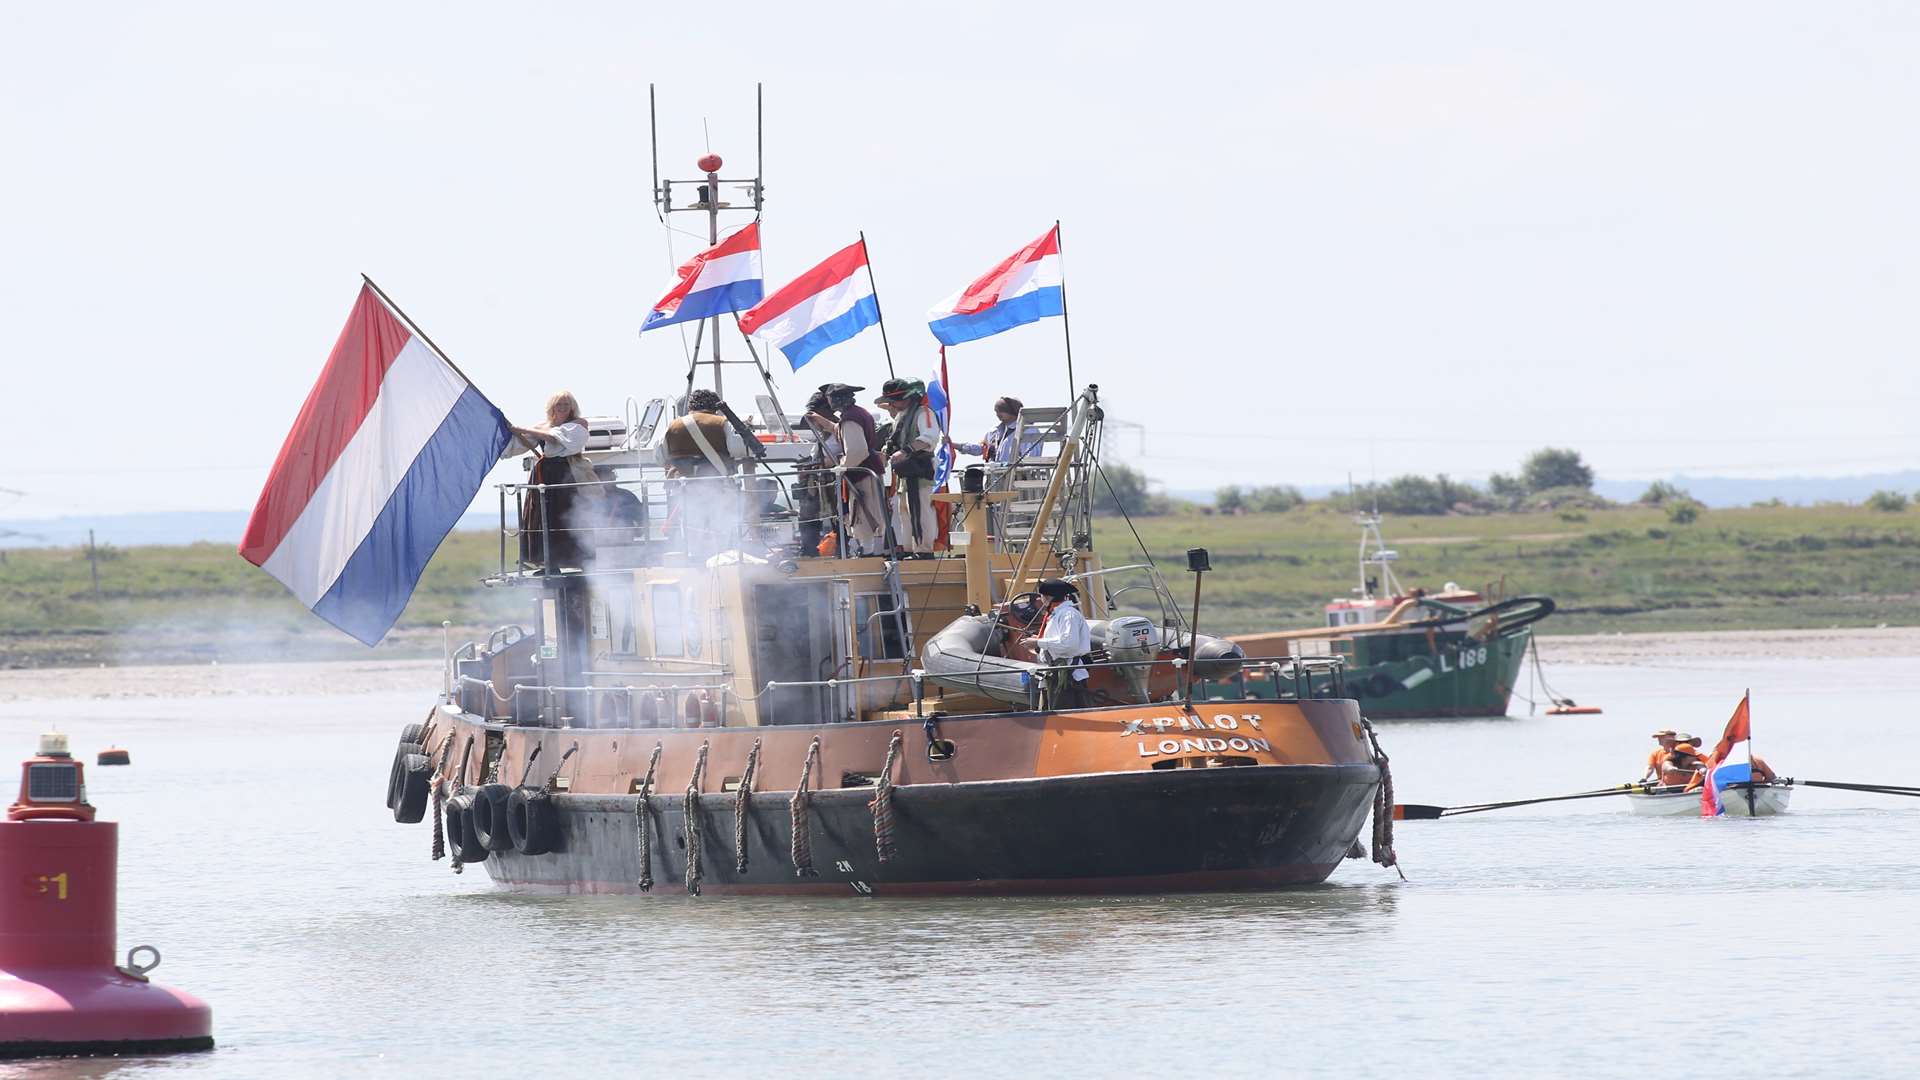 Avast! The Sheppey Pirates as Dutch sailors attack Queenborough